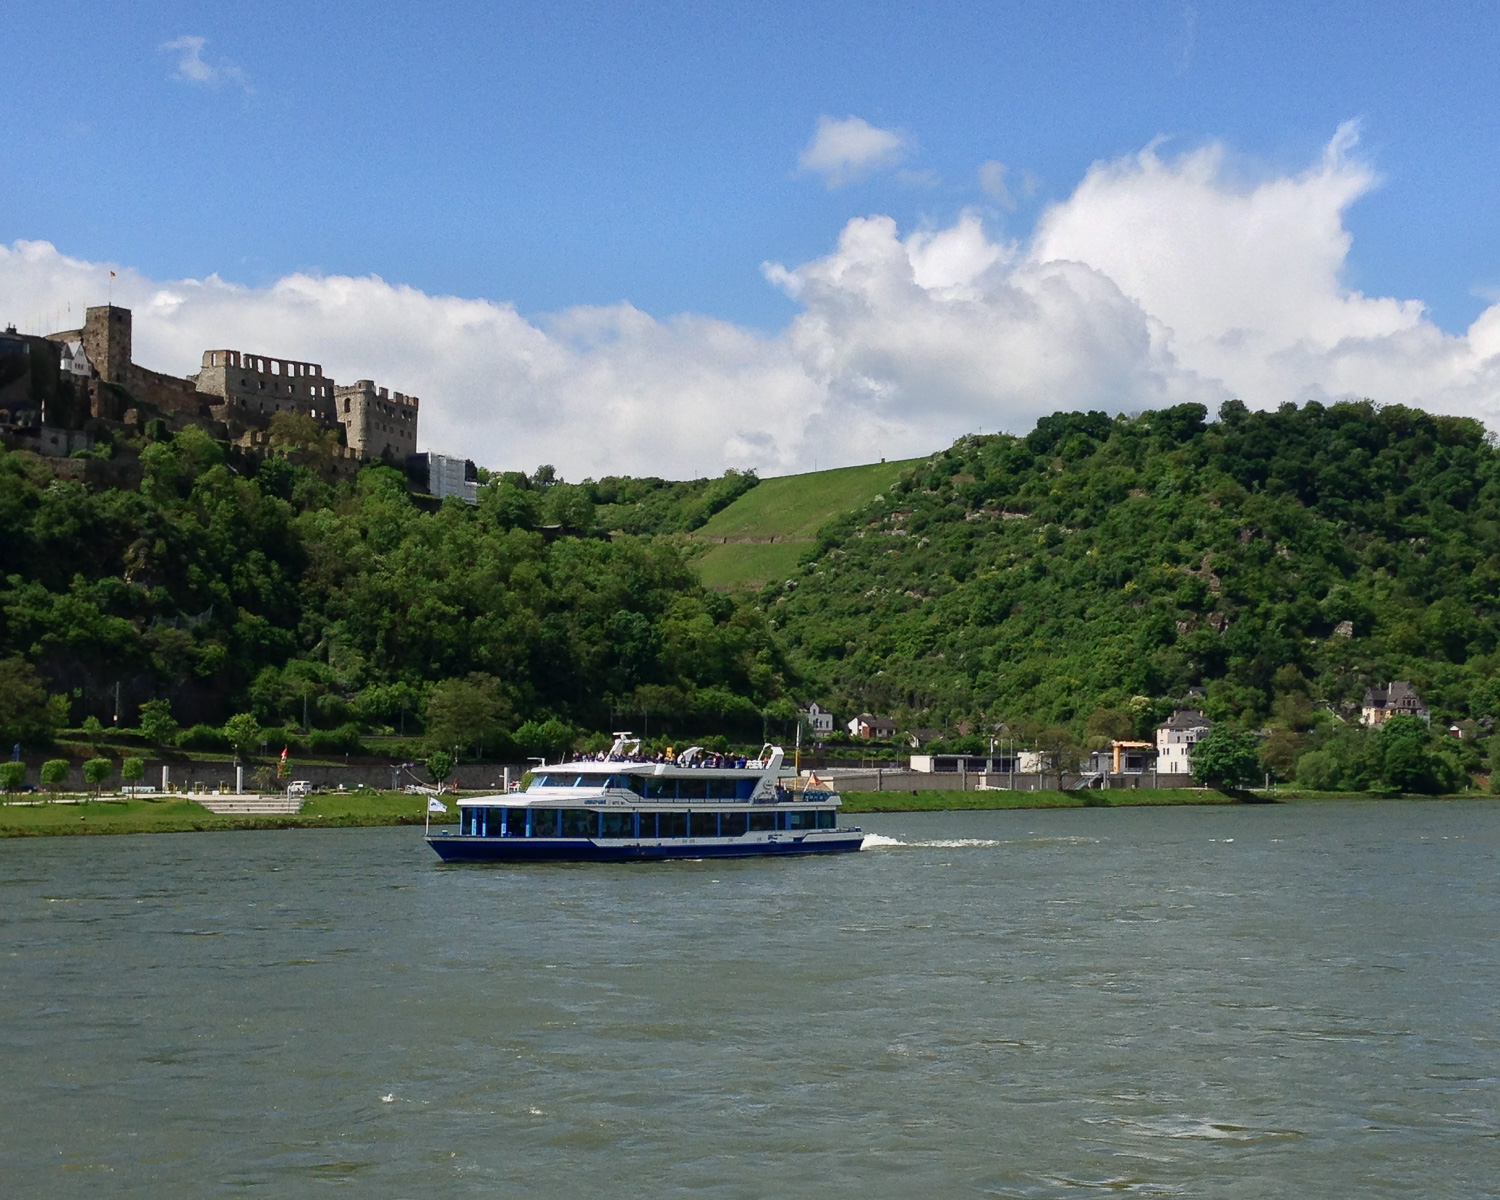 Castles of the Middle Rhine on our Rhine River Cruise Photo Heatheronhertravels.com